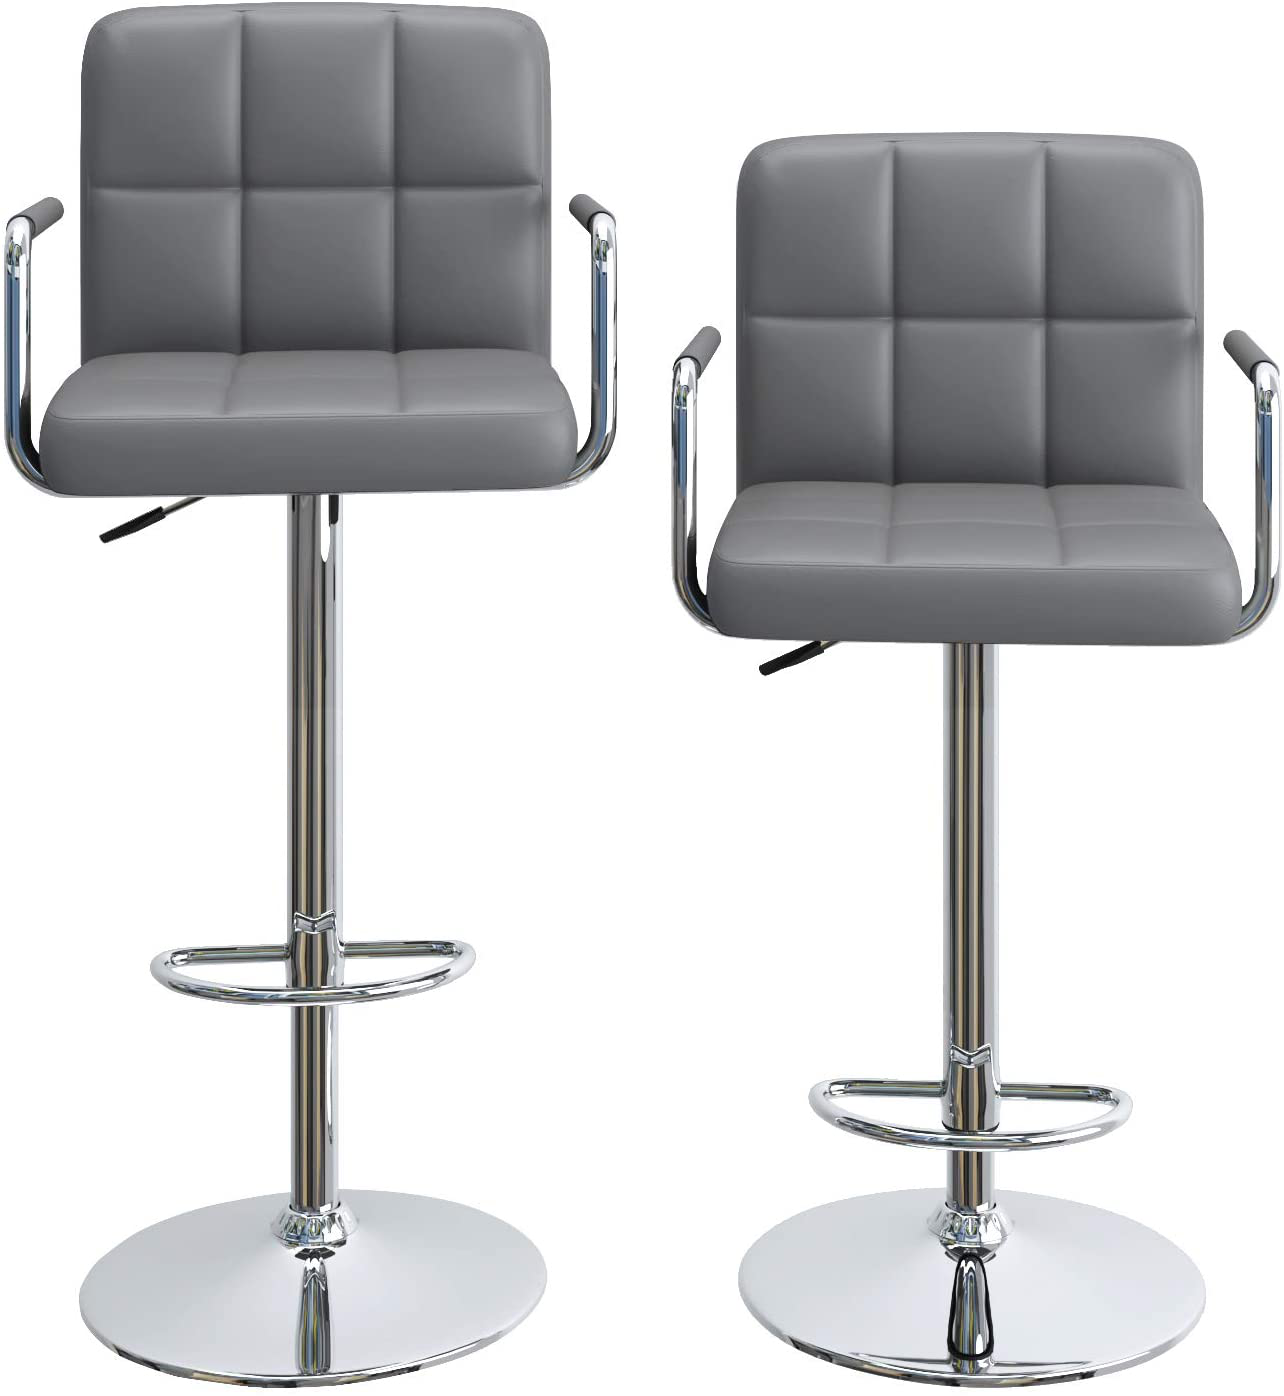 Toby Set of 2 Barstools Breakfast Chairs 